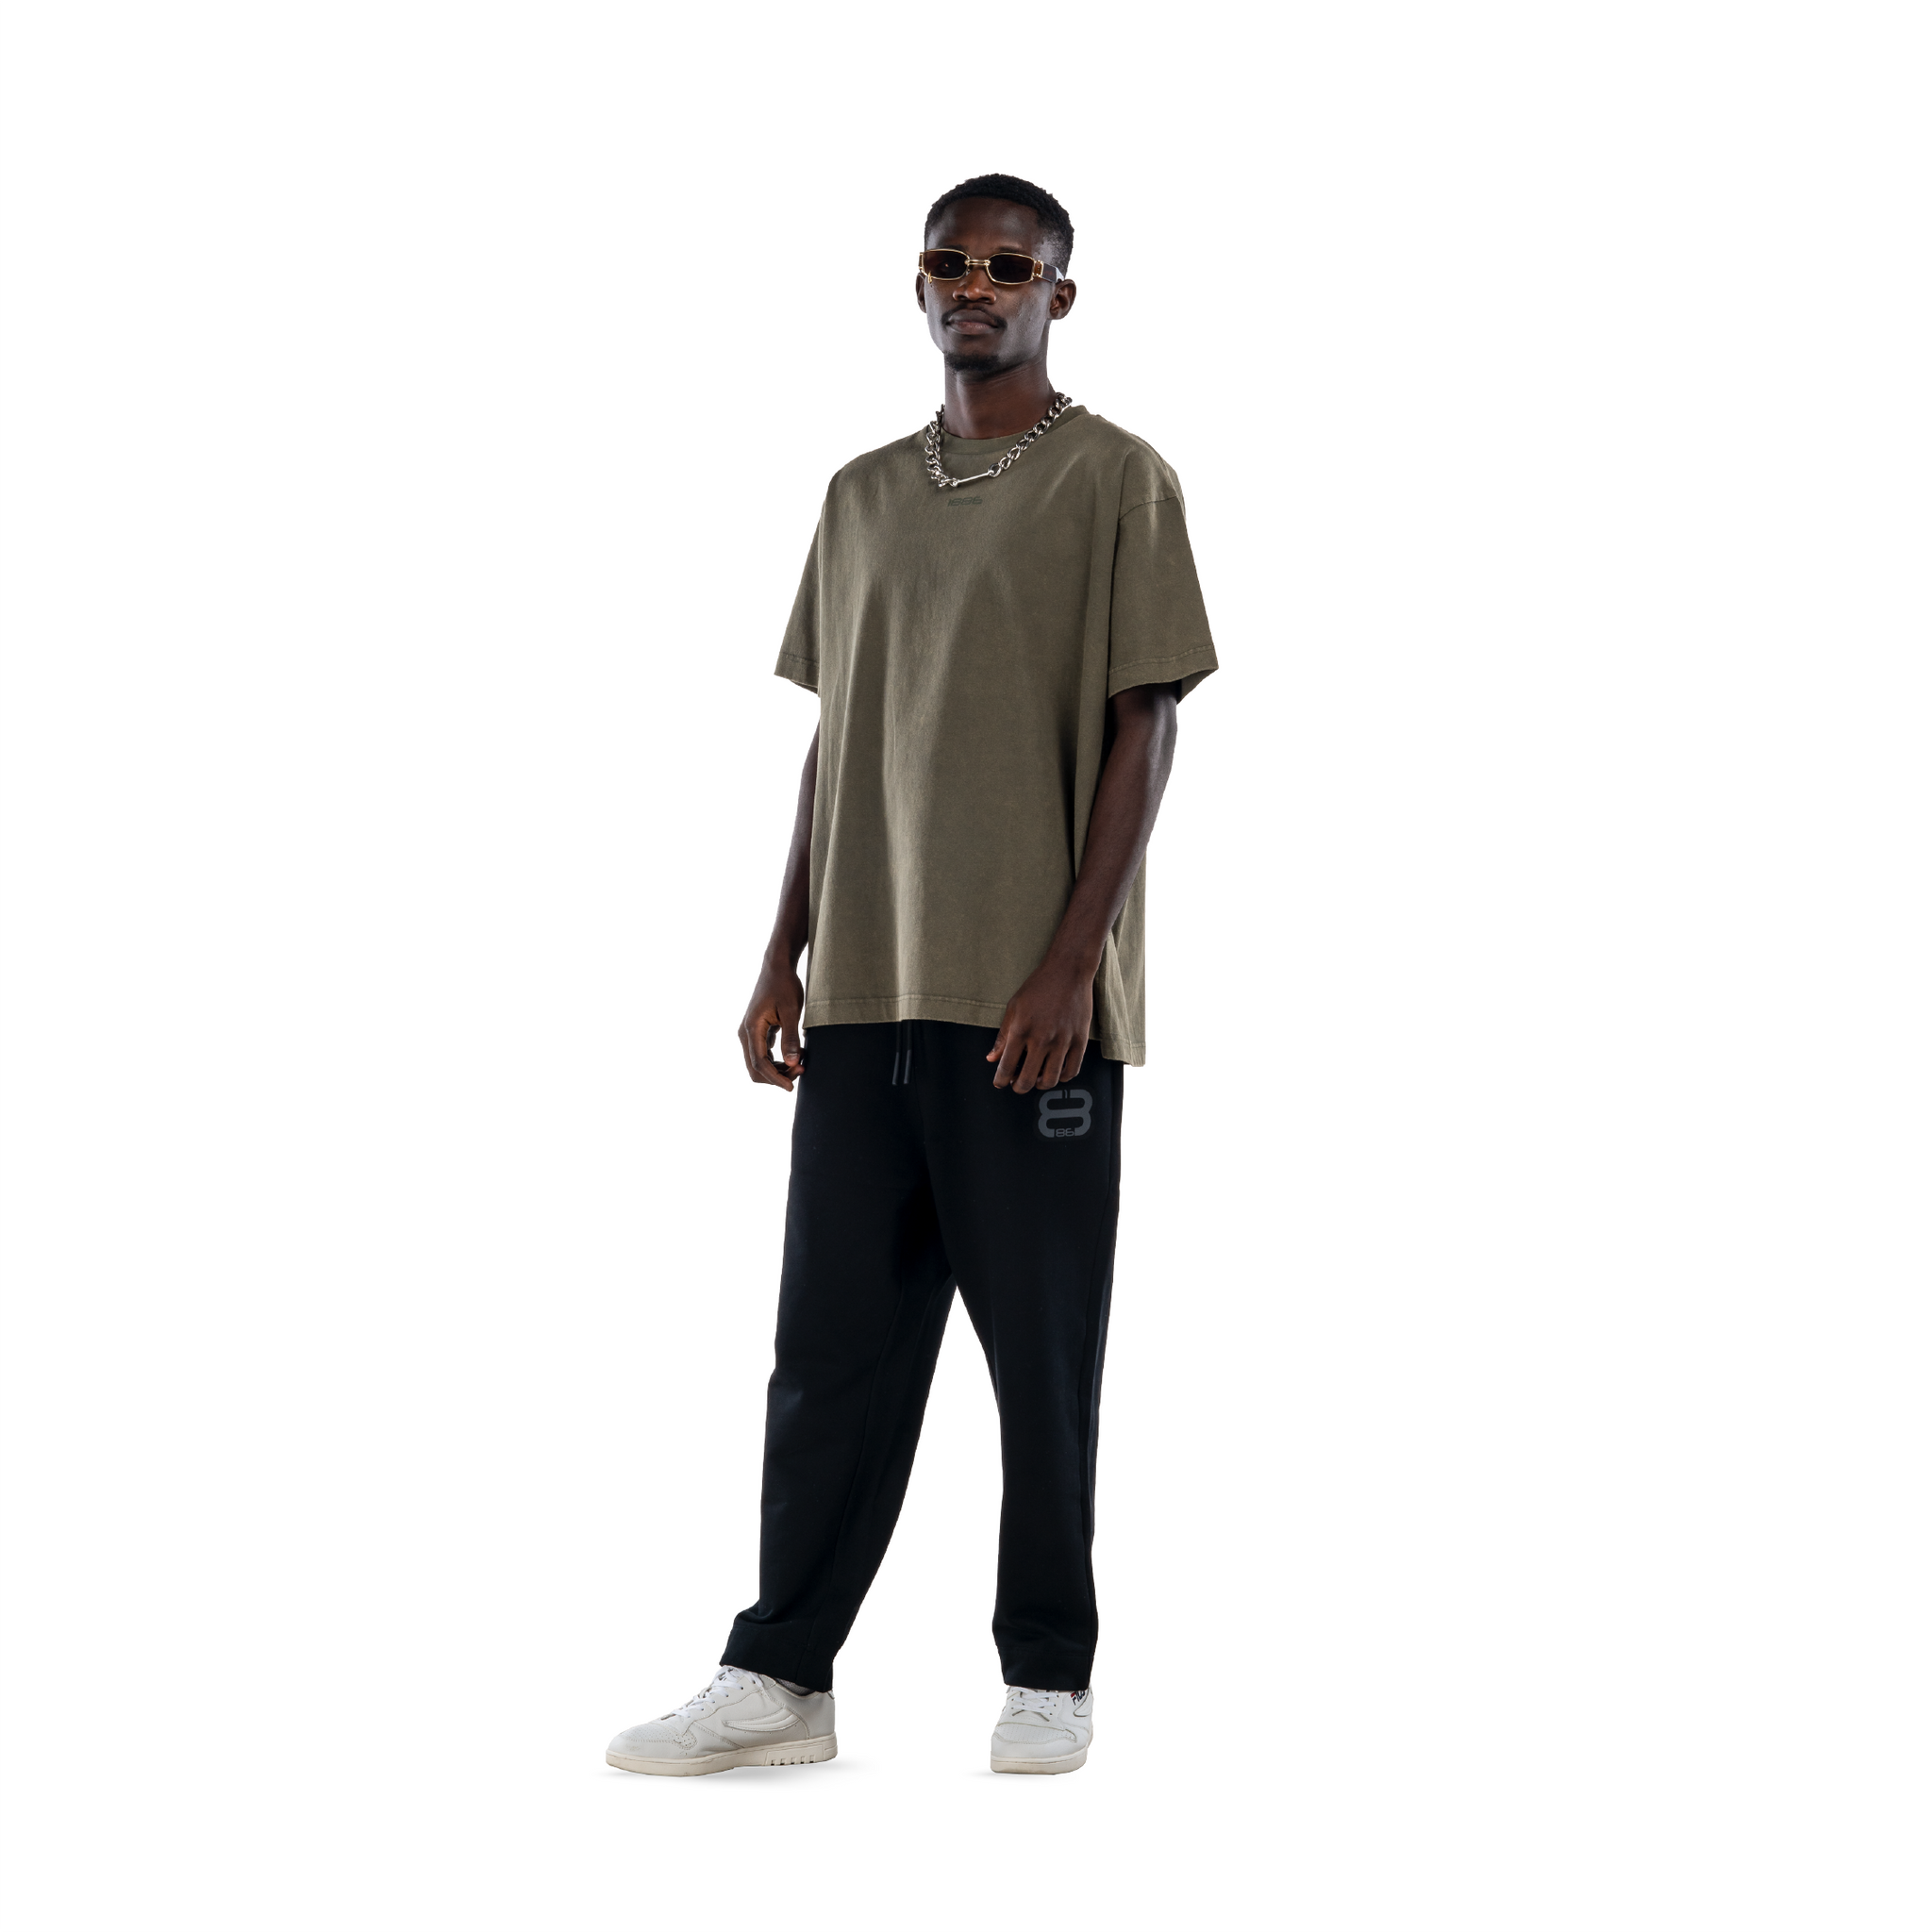 model wears olive green t-shirt with black sweatpants, sunglasses and white shoes. front view.